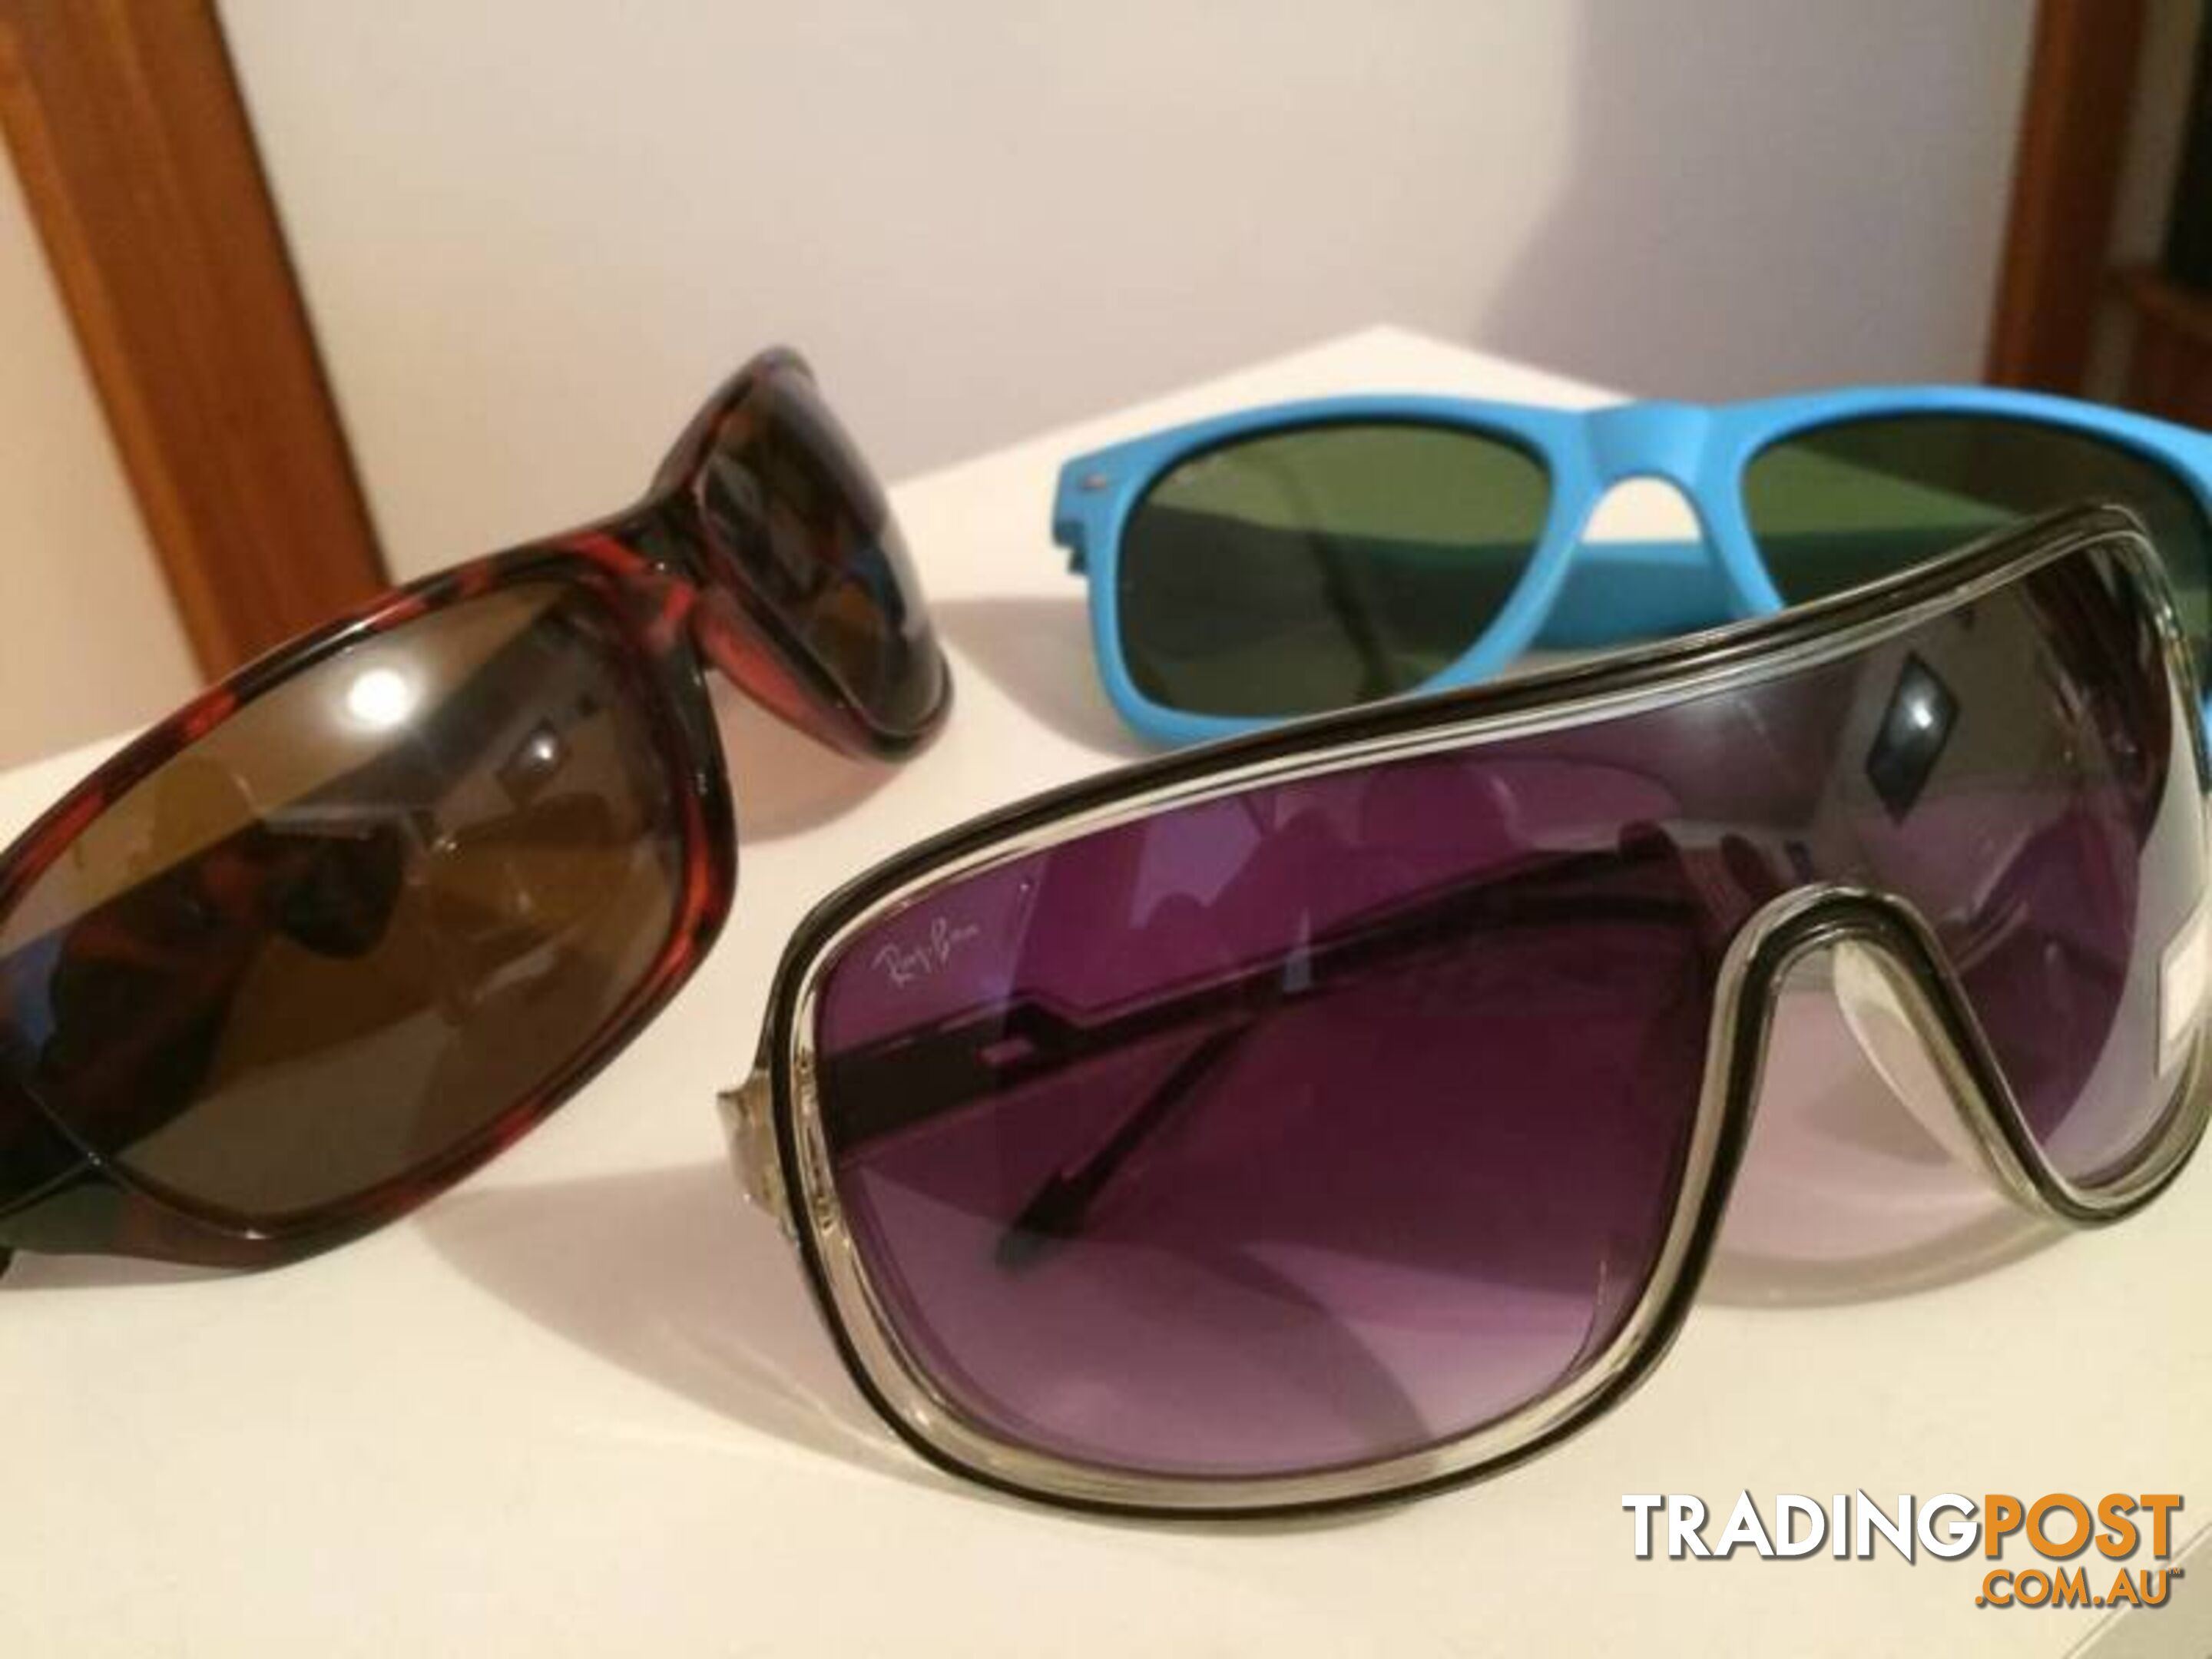 3 x UNISEX SUNGLASSES FOR $75 2X RAY BANS 1 X DIESEL